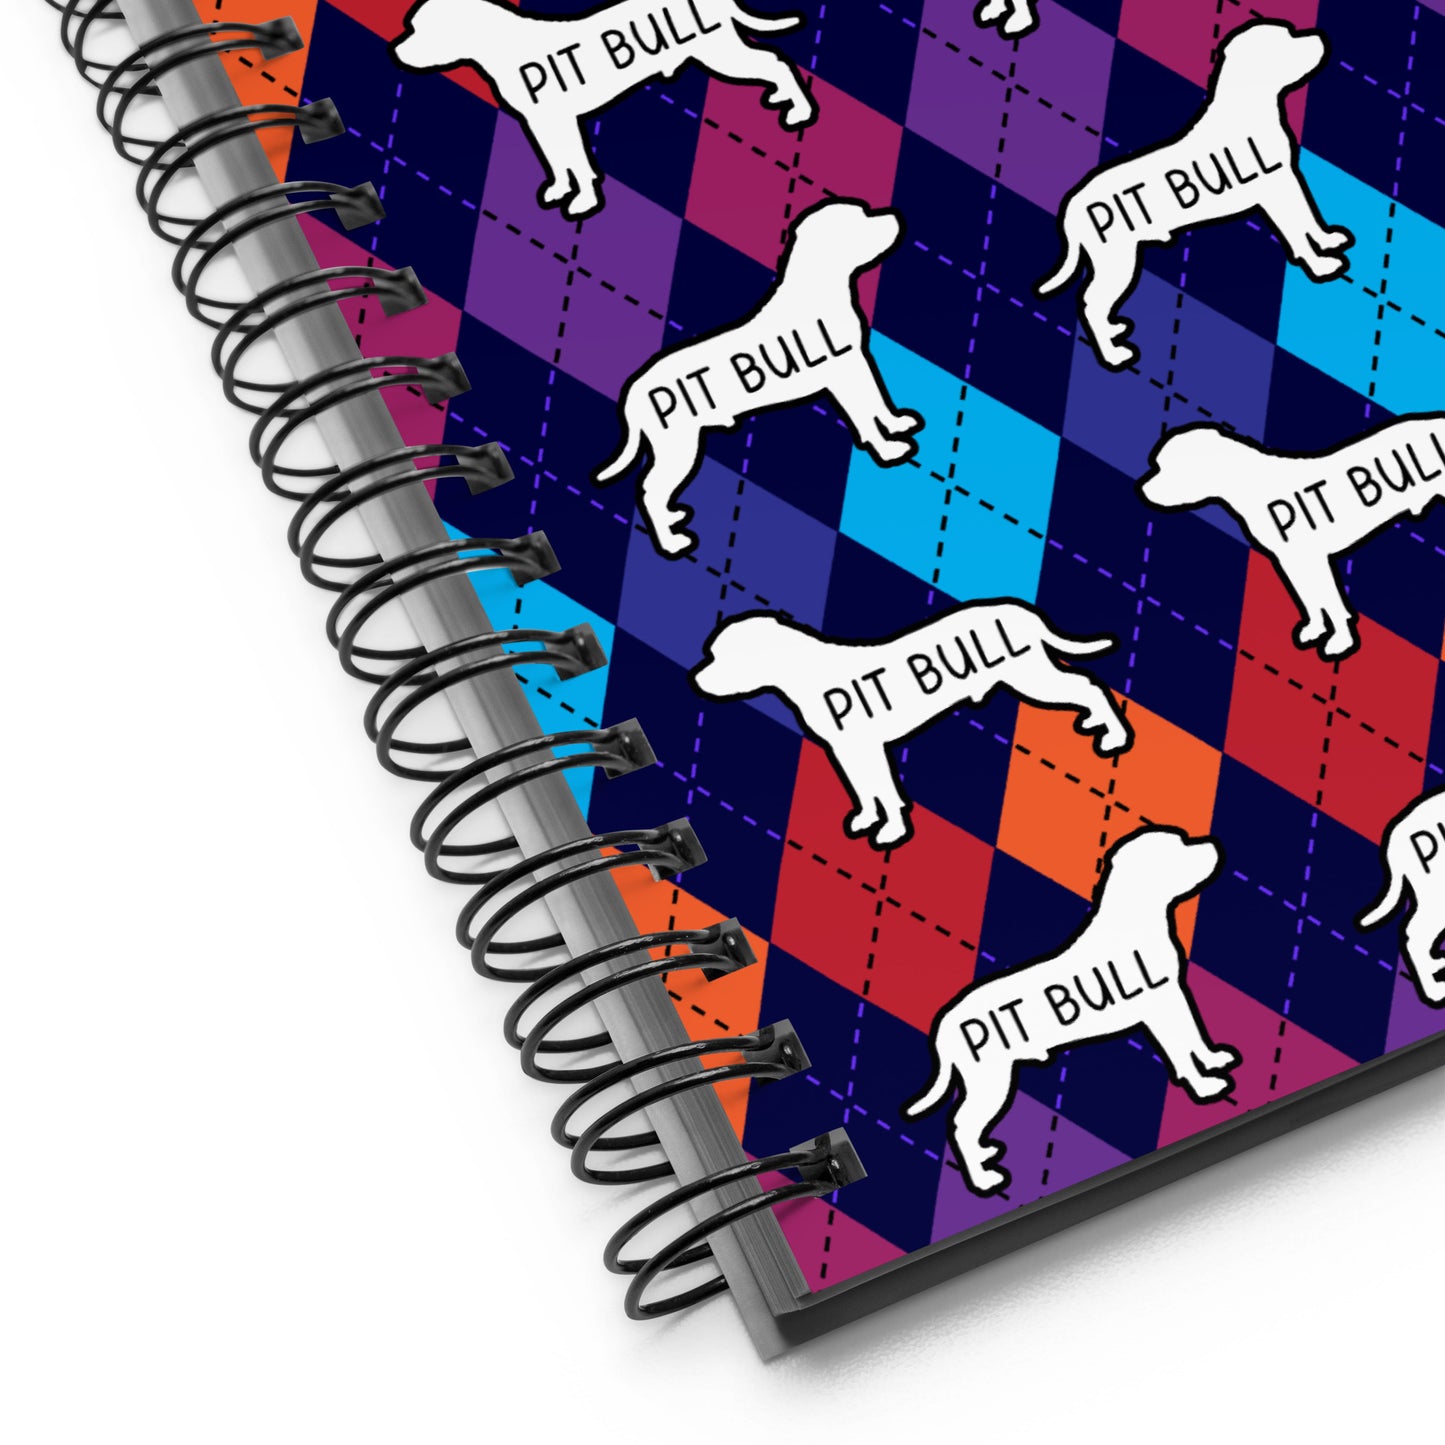 Pit Bull Colorful Argyle Spiral notebook